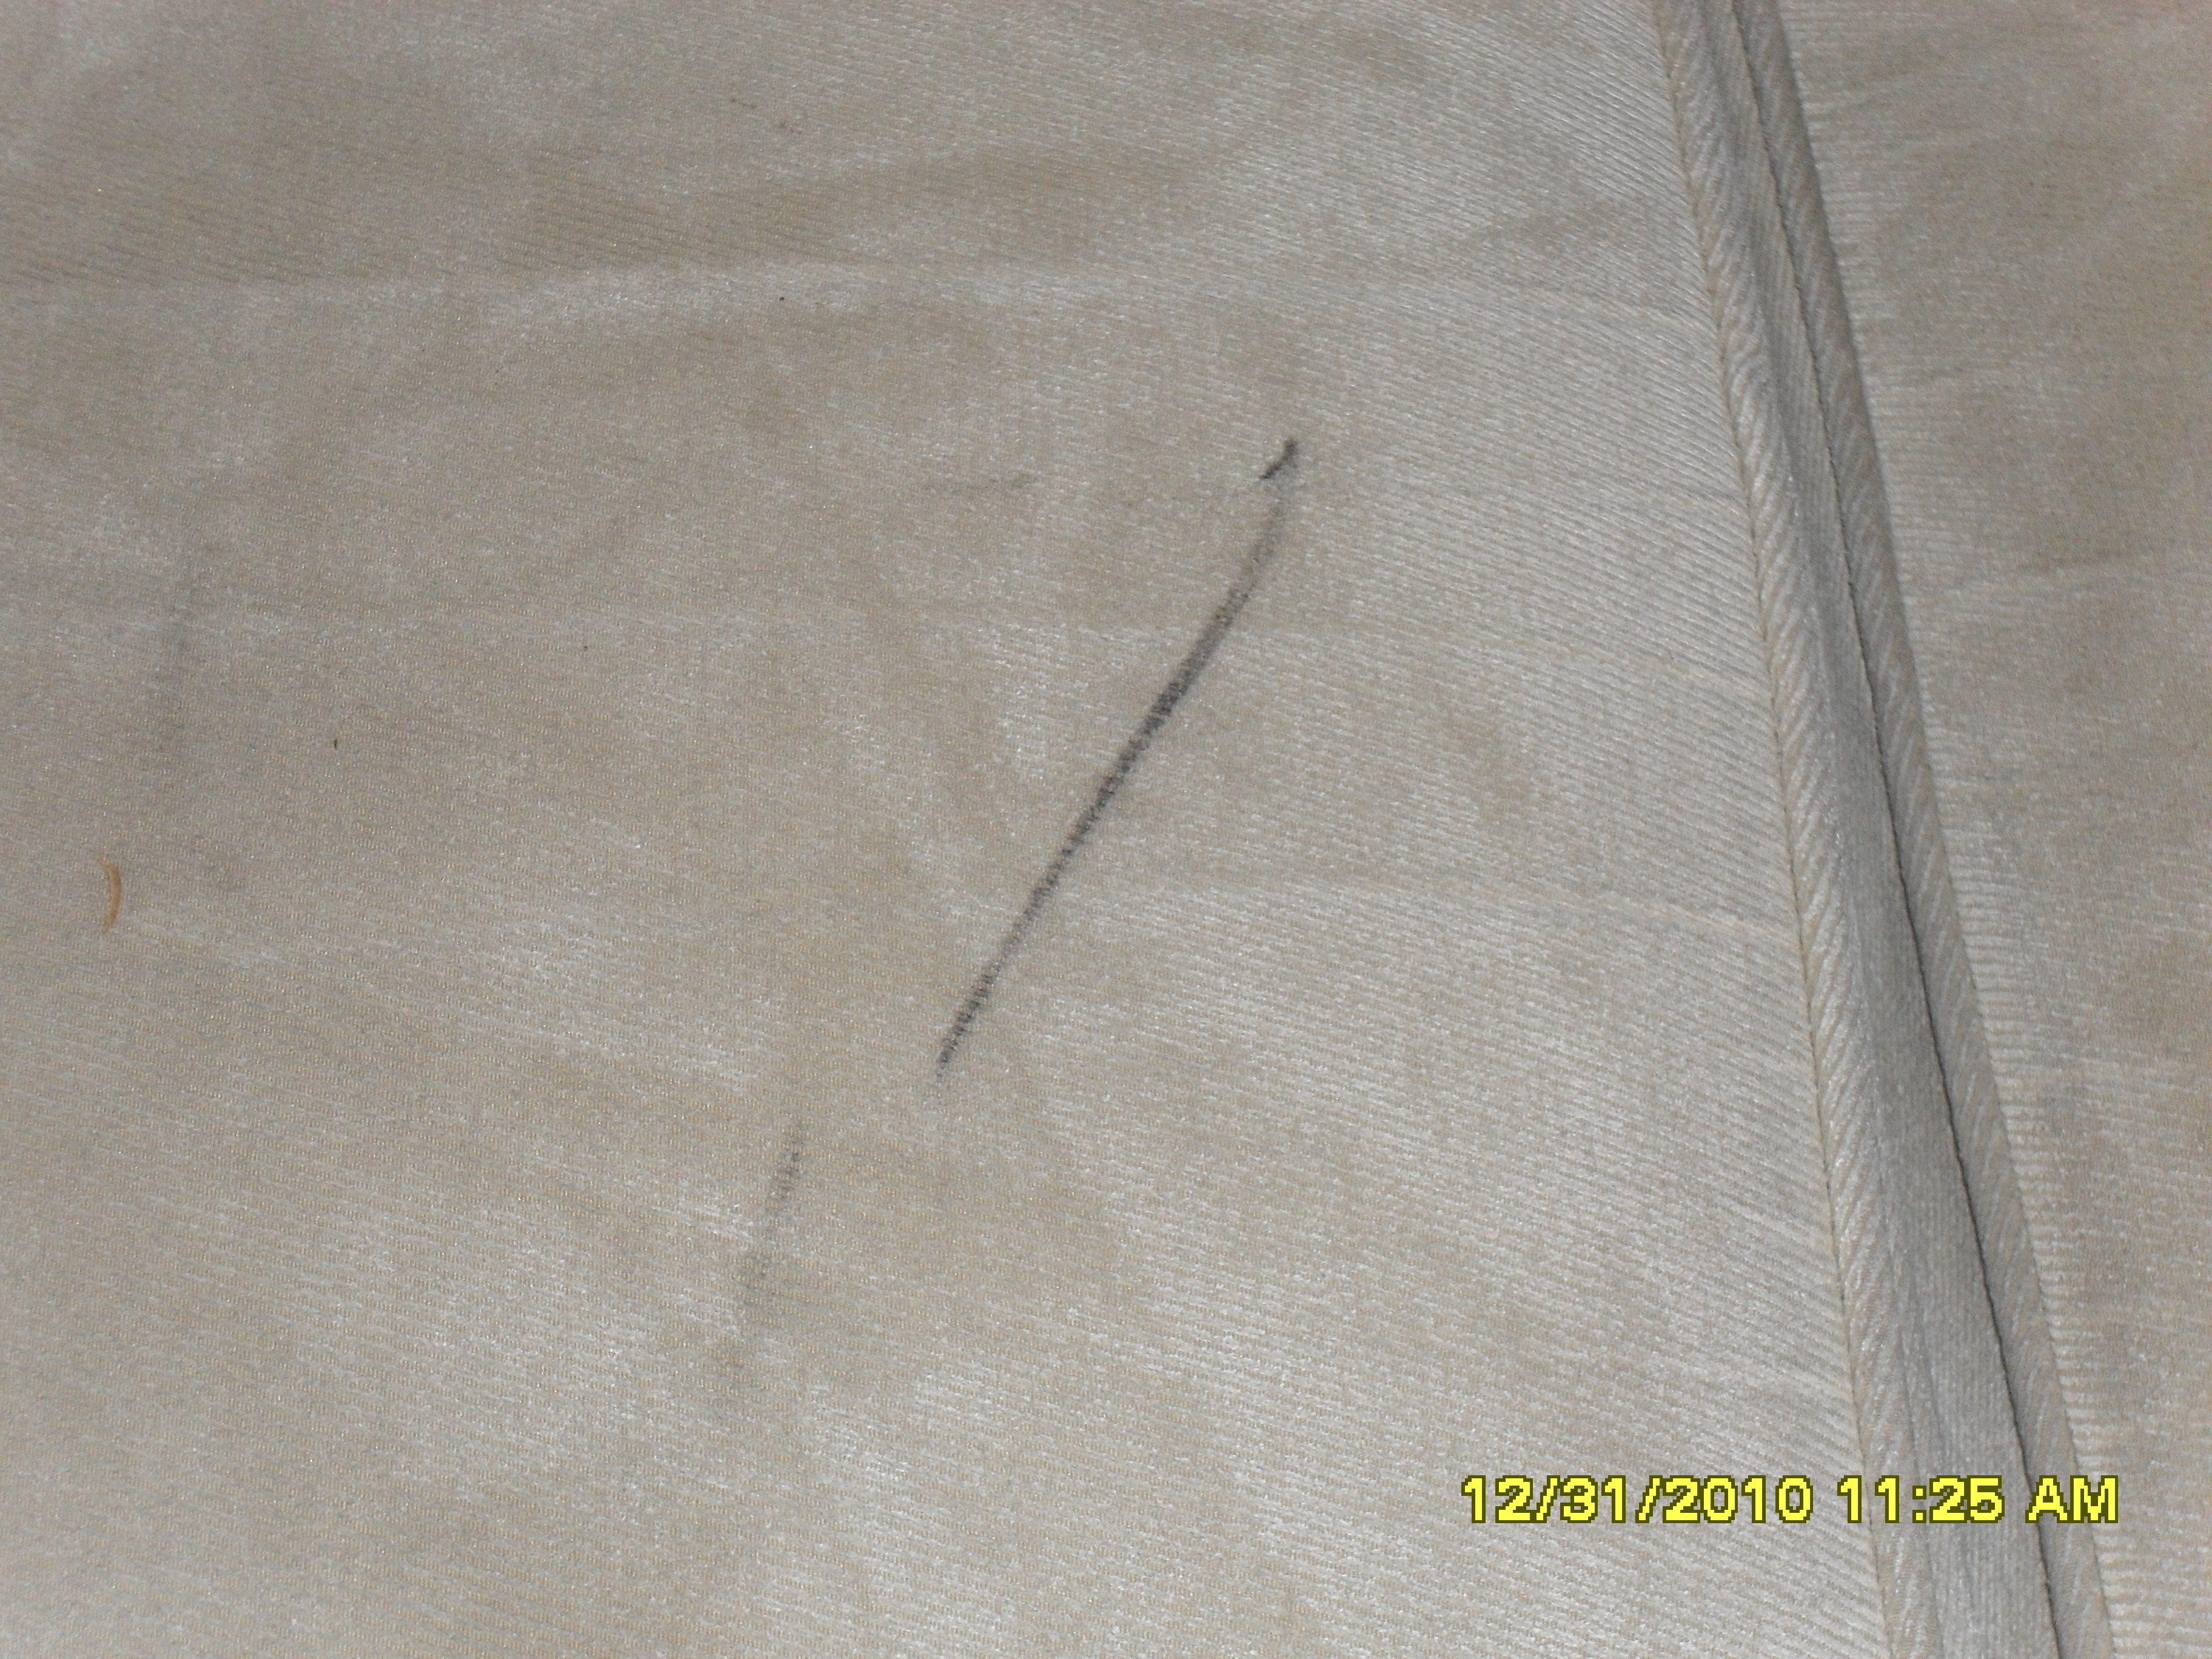 My sofa has a black mark on it that needs to be cleaned under my 7 year warranty with Stainsafe